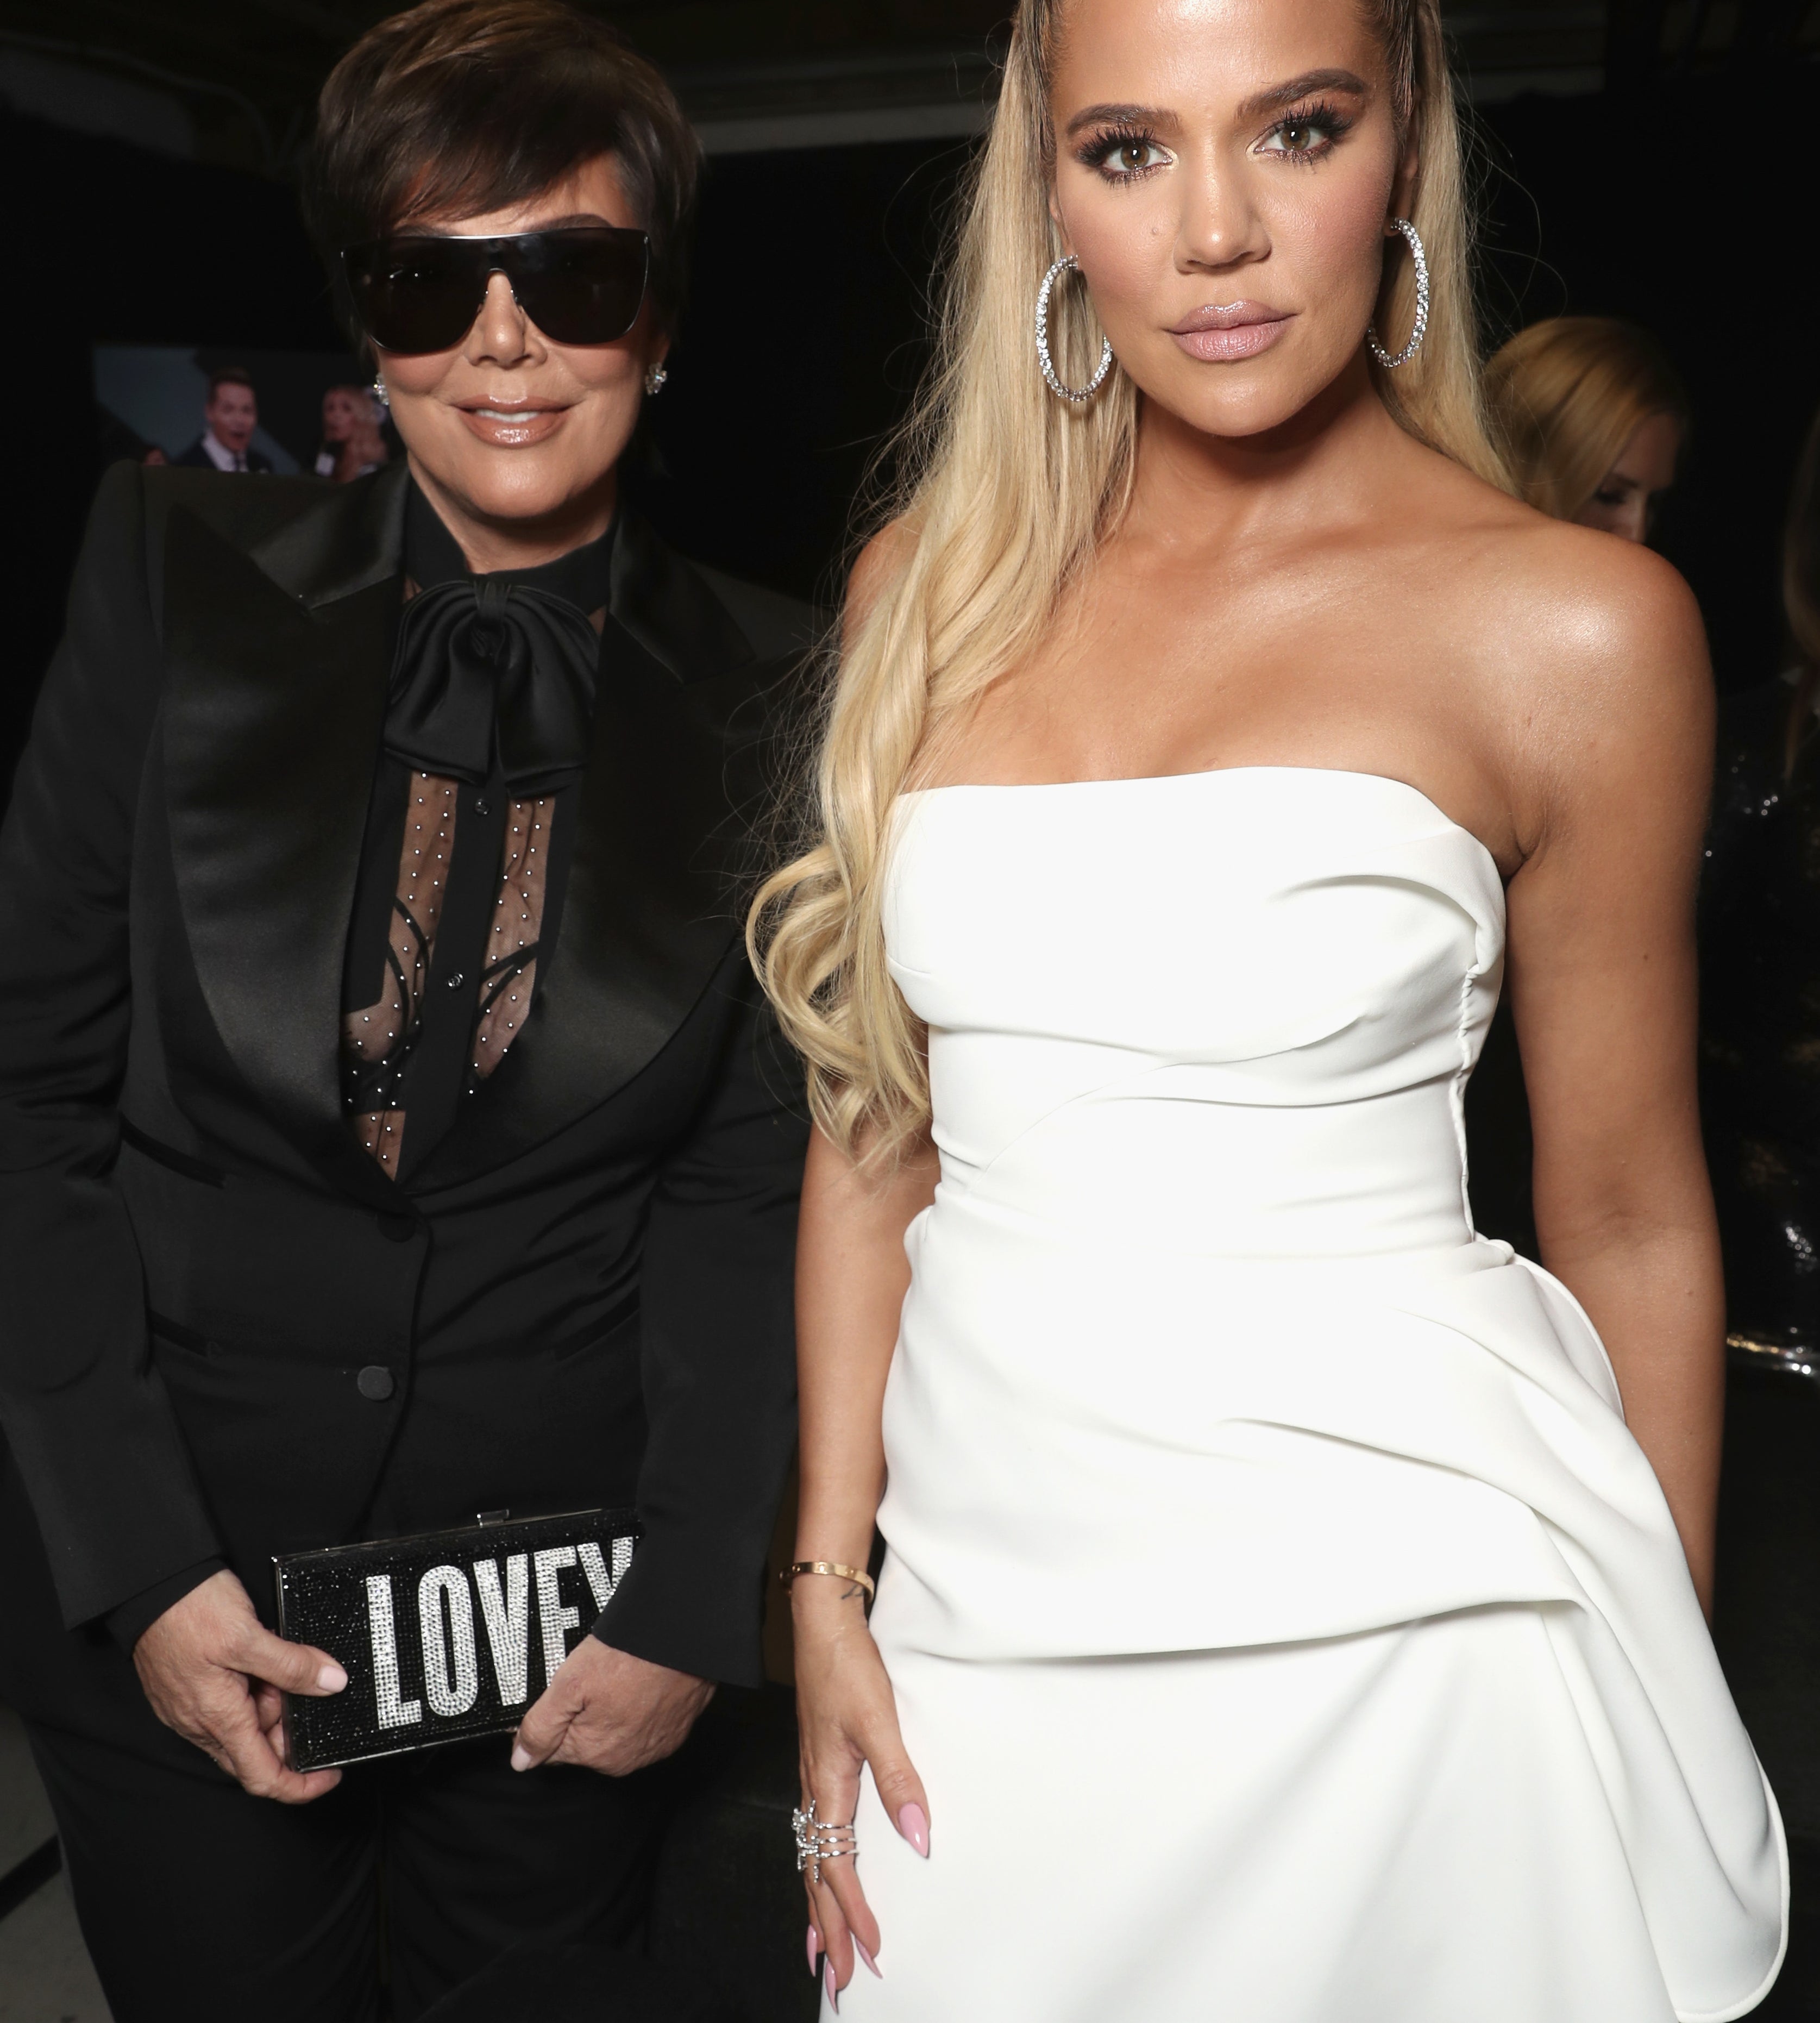 Close-up of Khloé and Kris standing together and smiling